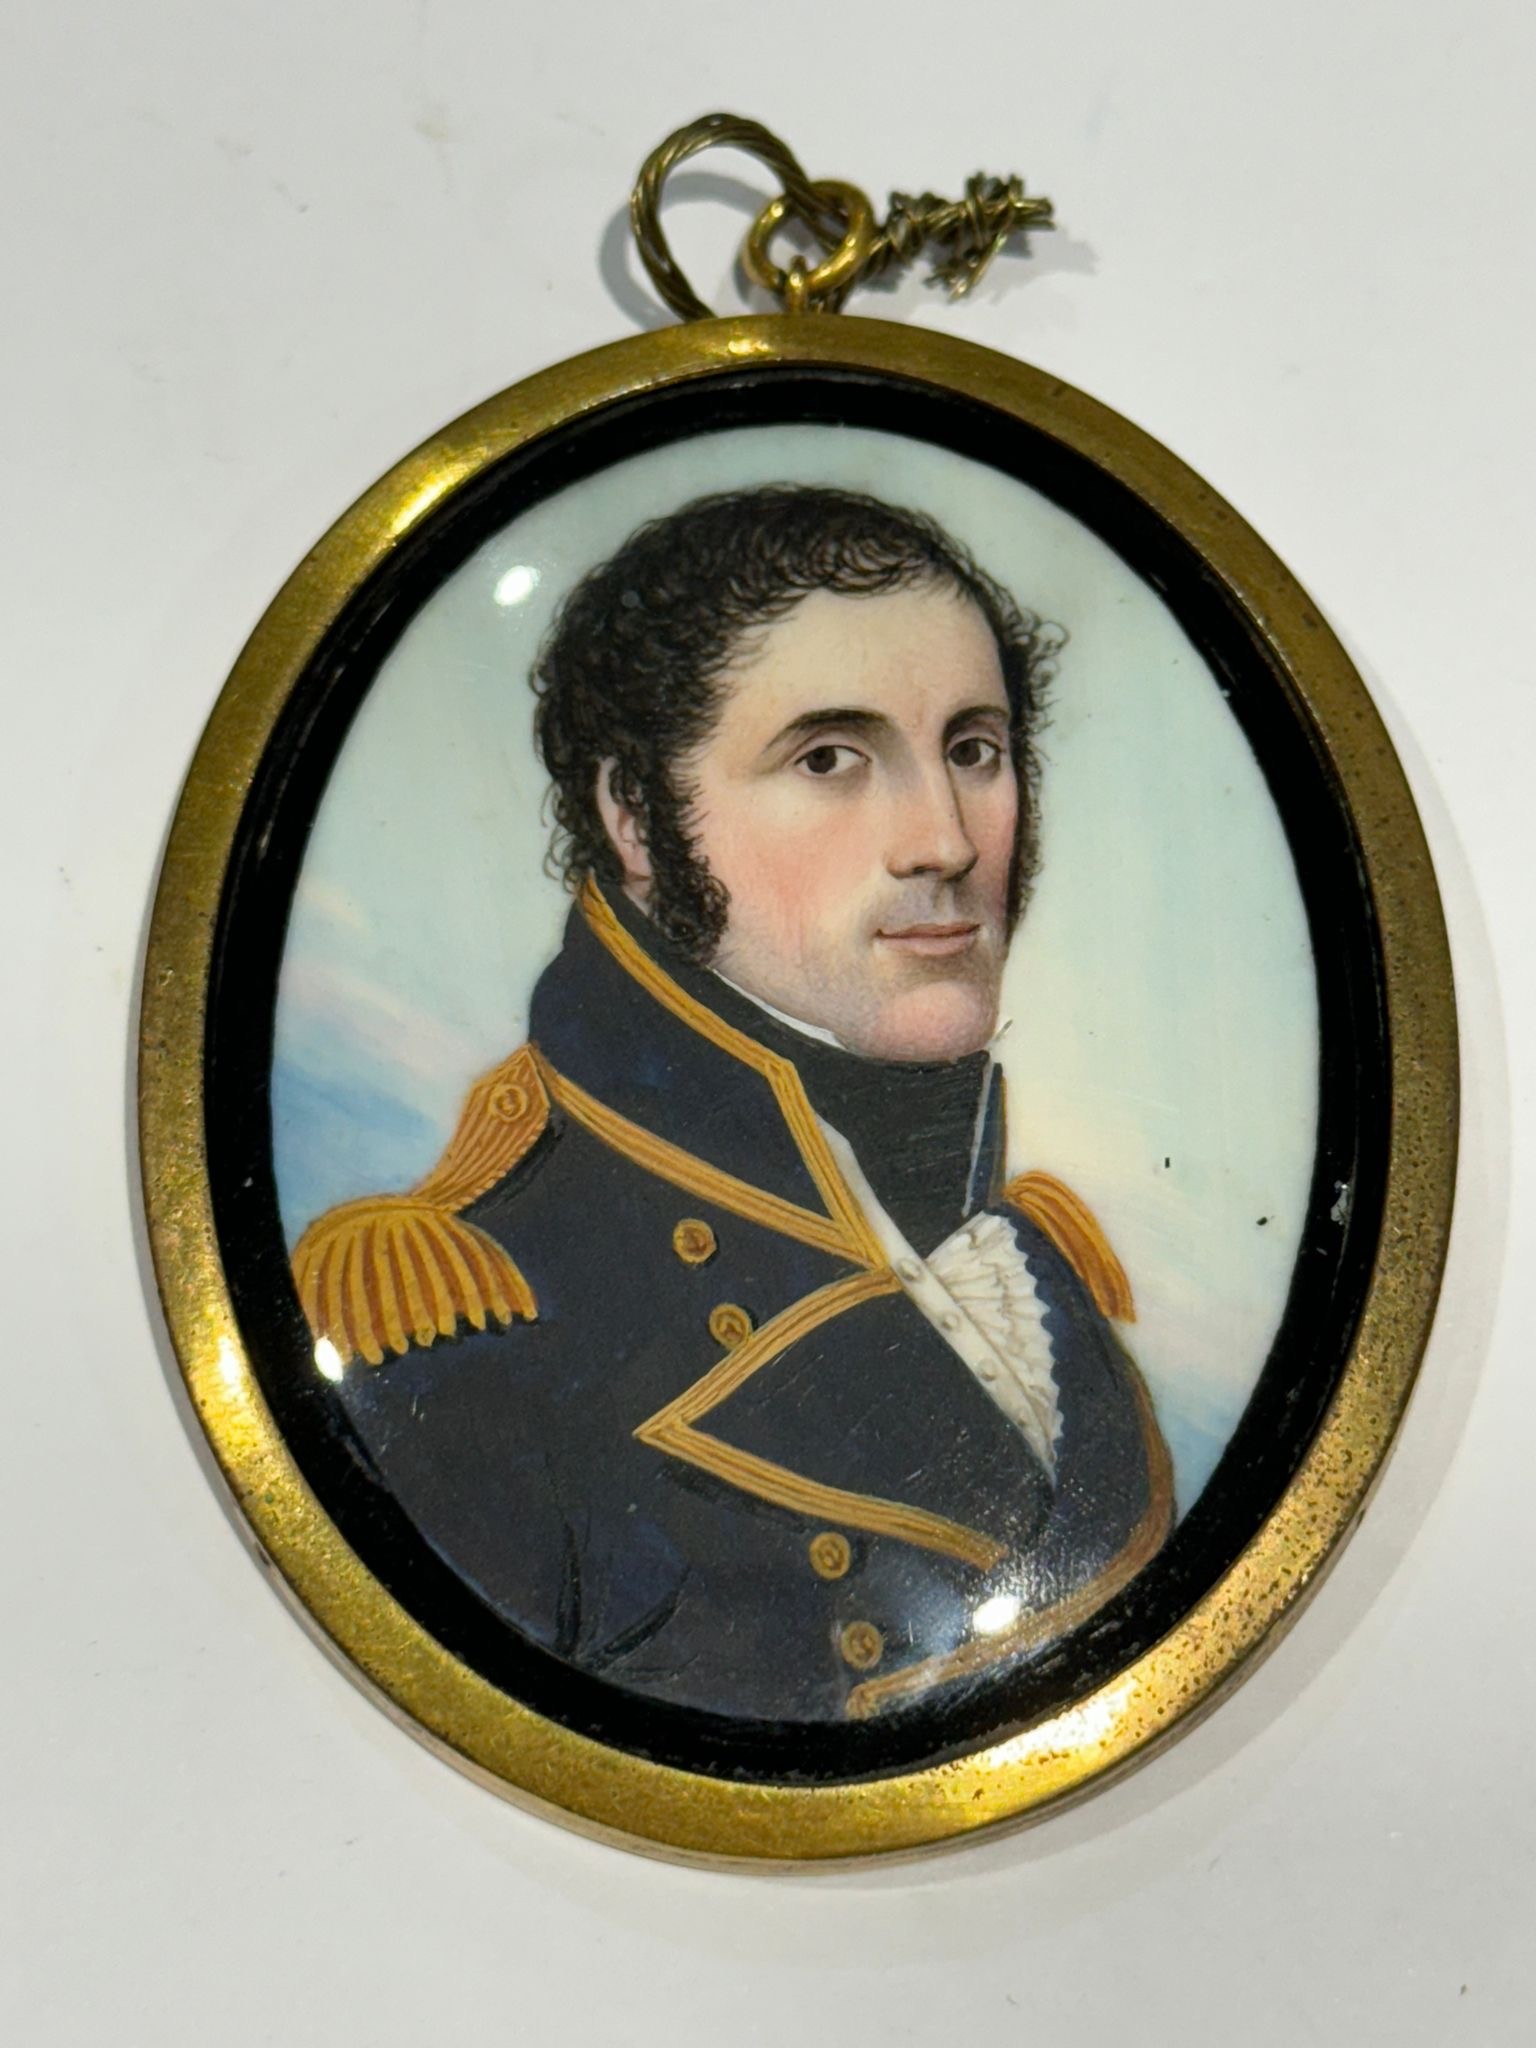 A Mid-19th century oval portrait miniature of a senior Naval officer, with black curly hair and